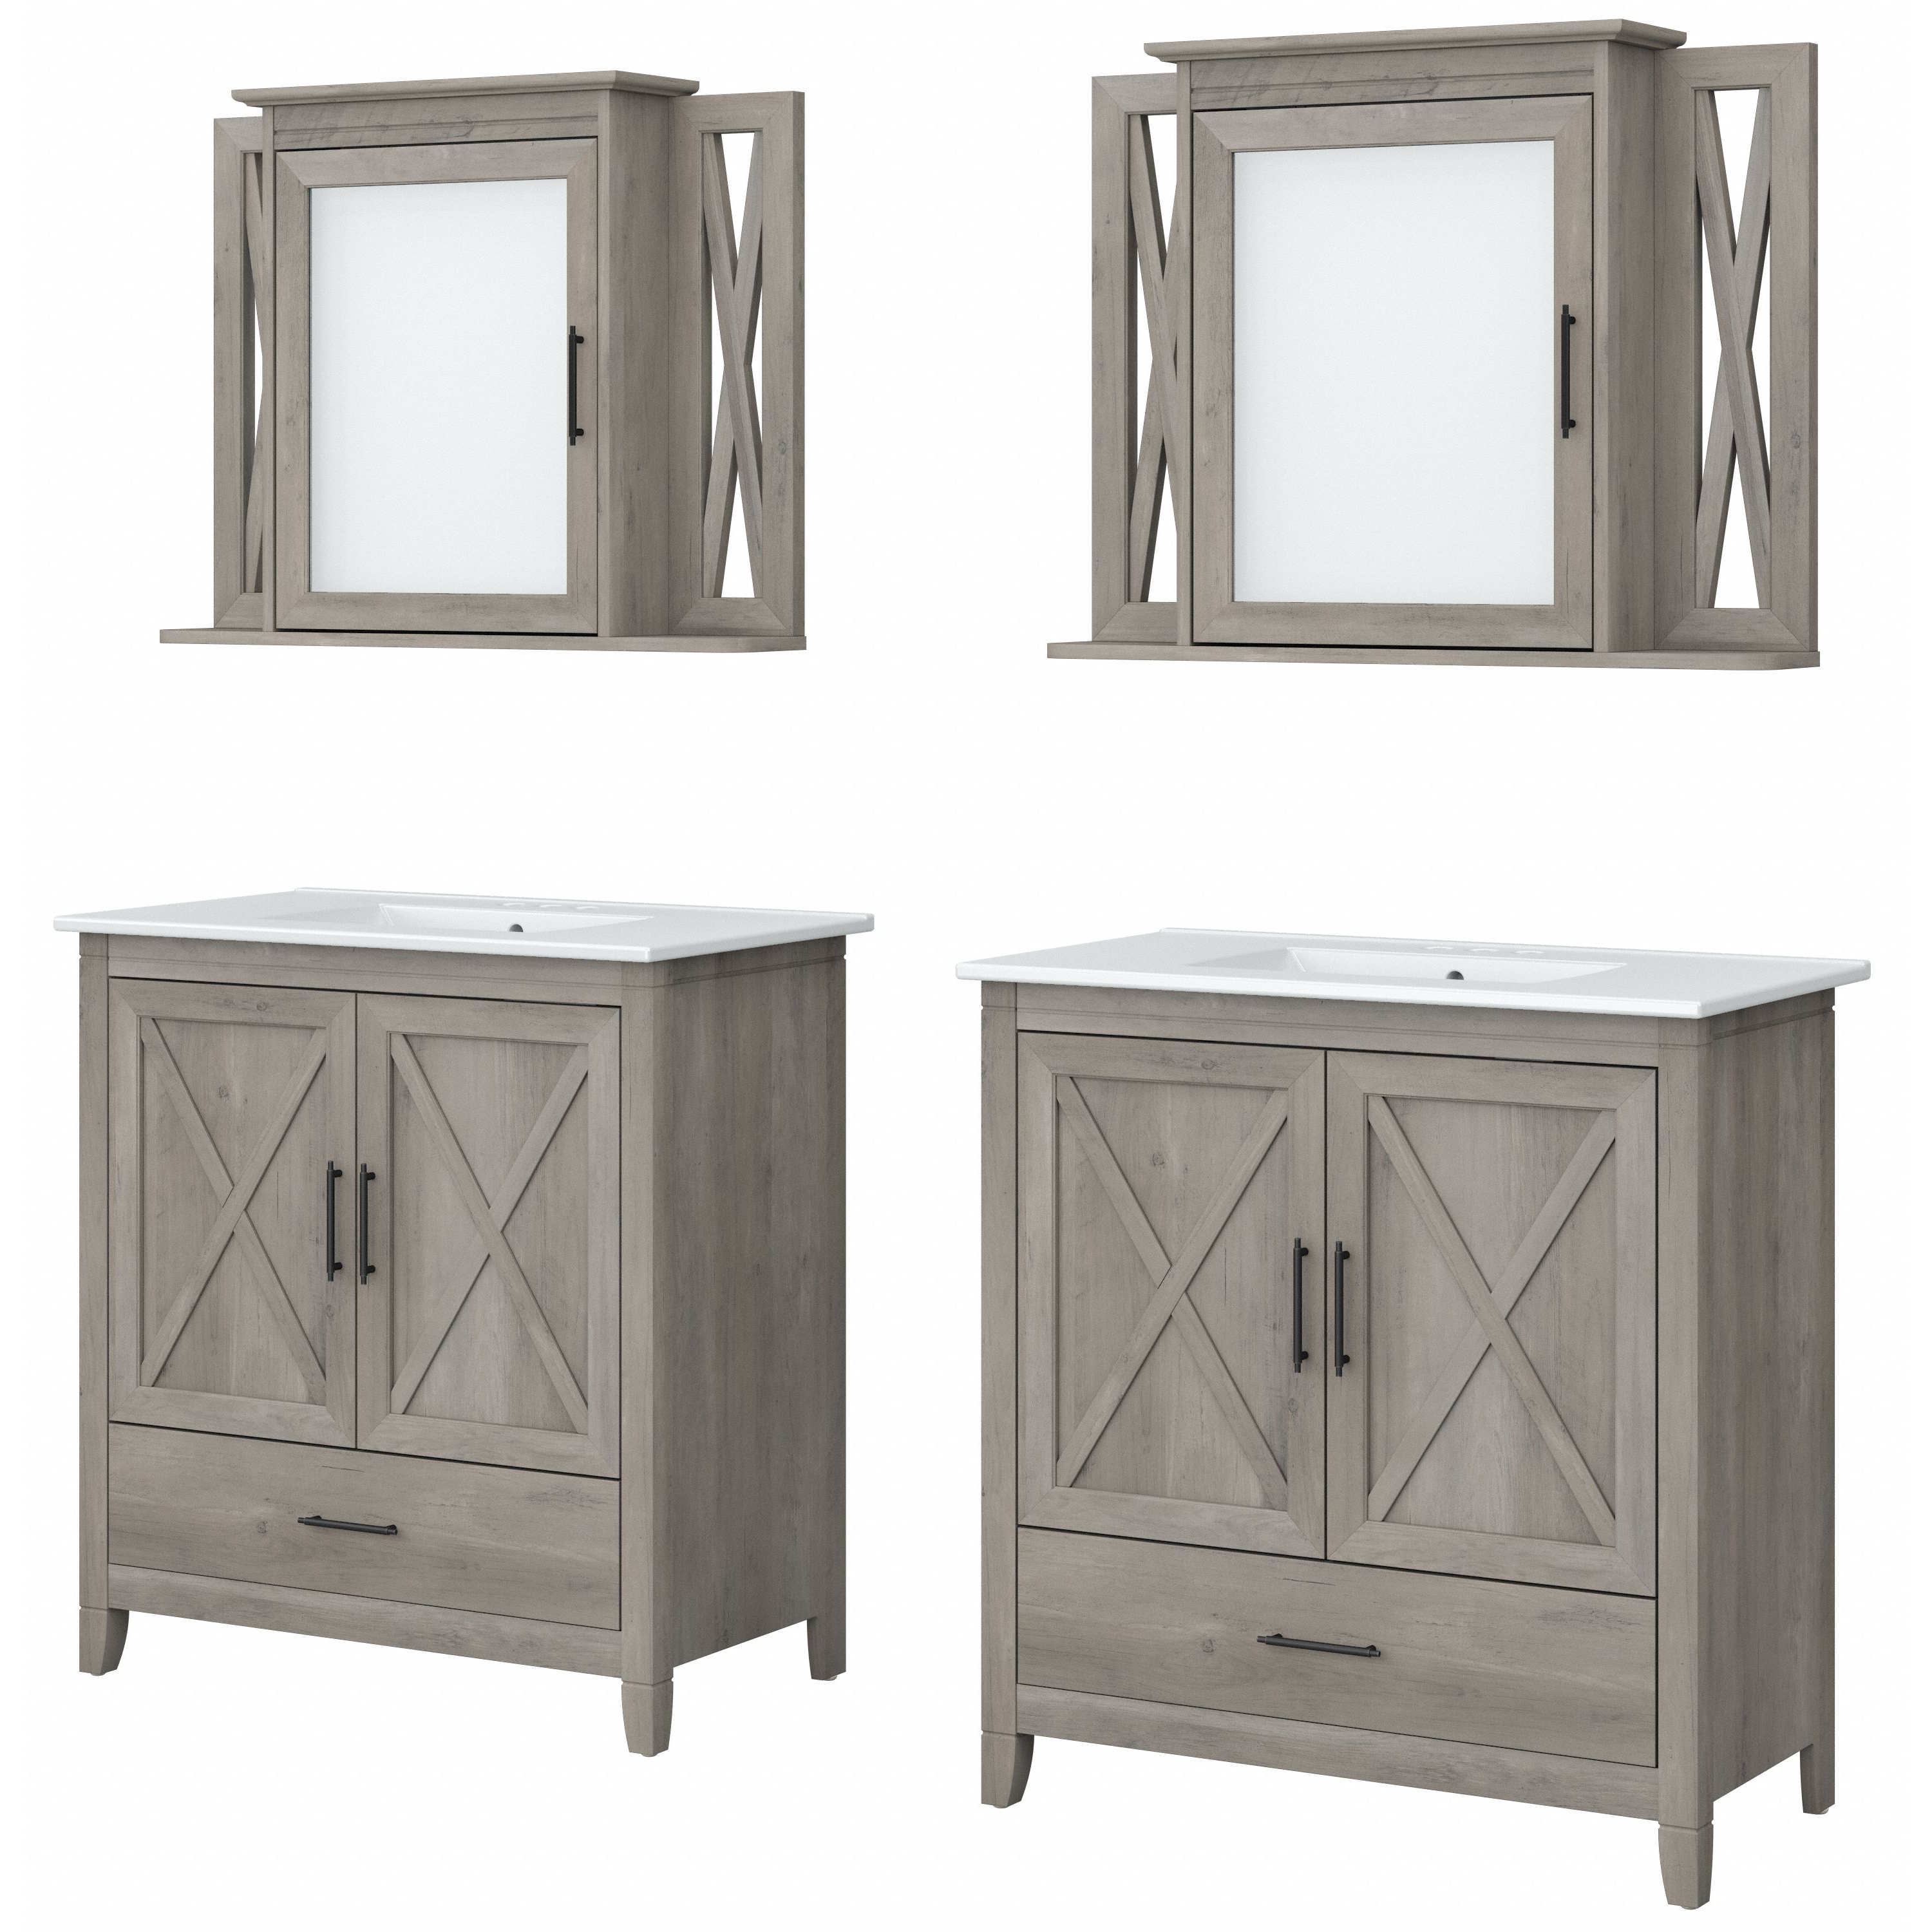 Shop Bush Furniture Key West 64W Double Vanity Set with Sinks and Medicine Cabinets 02 KWS042DG #color_driftwood gray